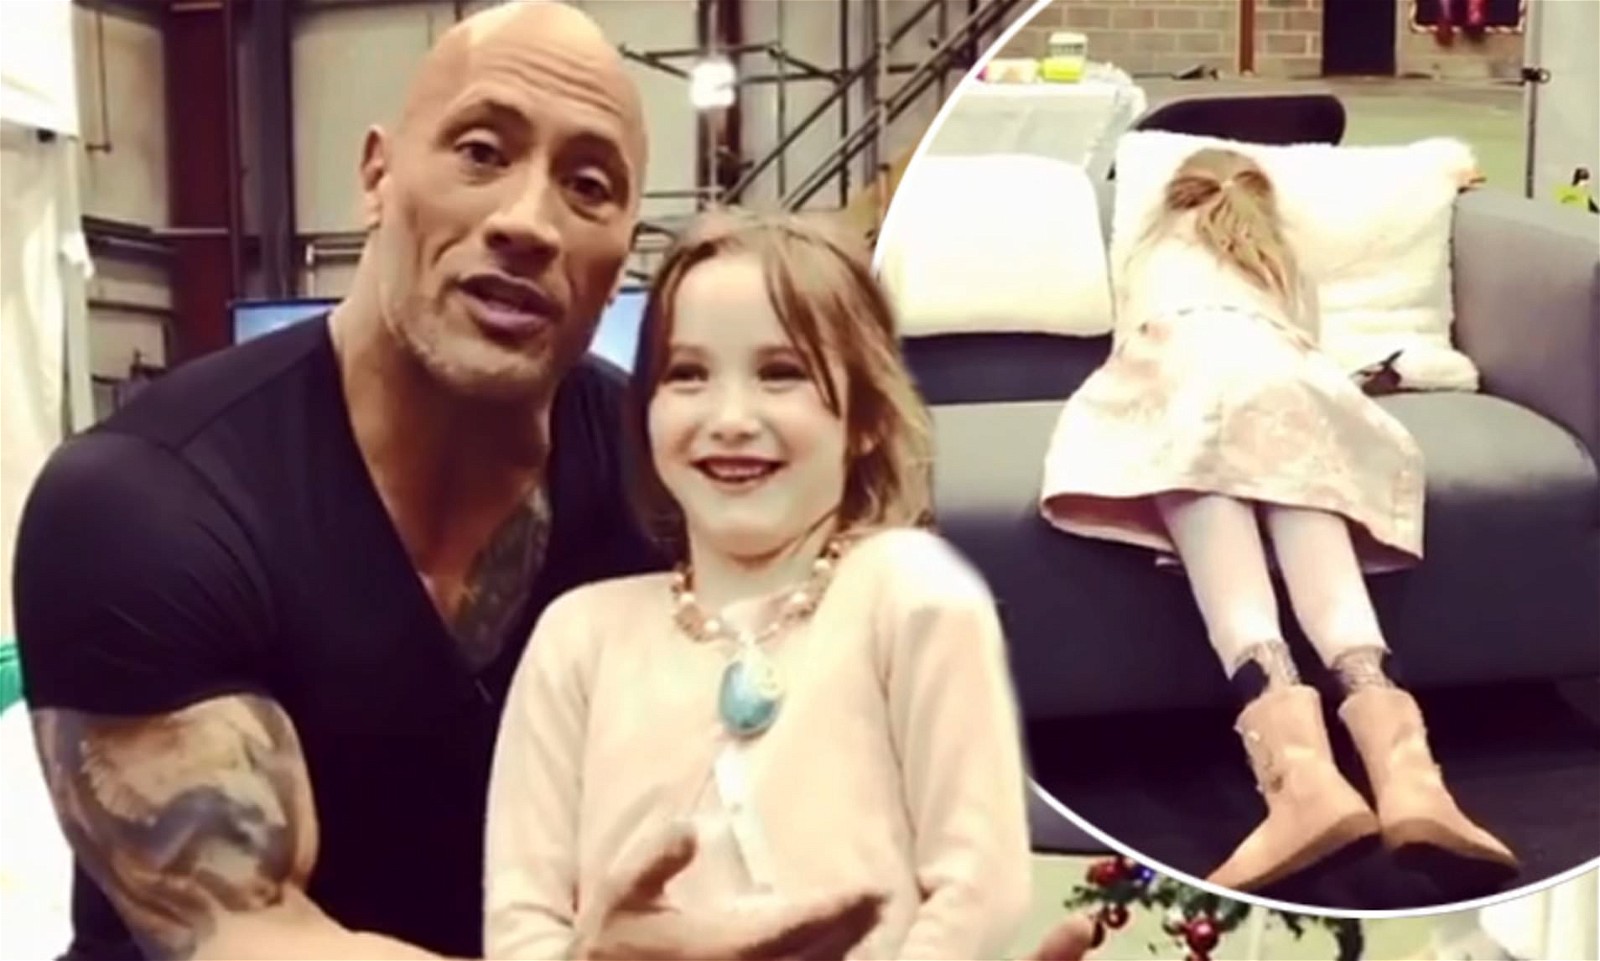 Dwayne Johnson supporting the Make-A-Wish foundation 